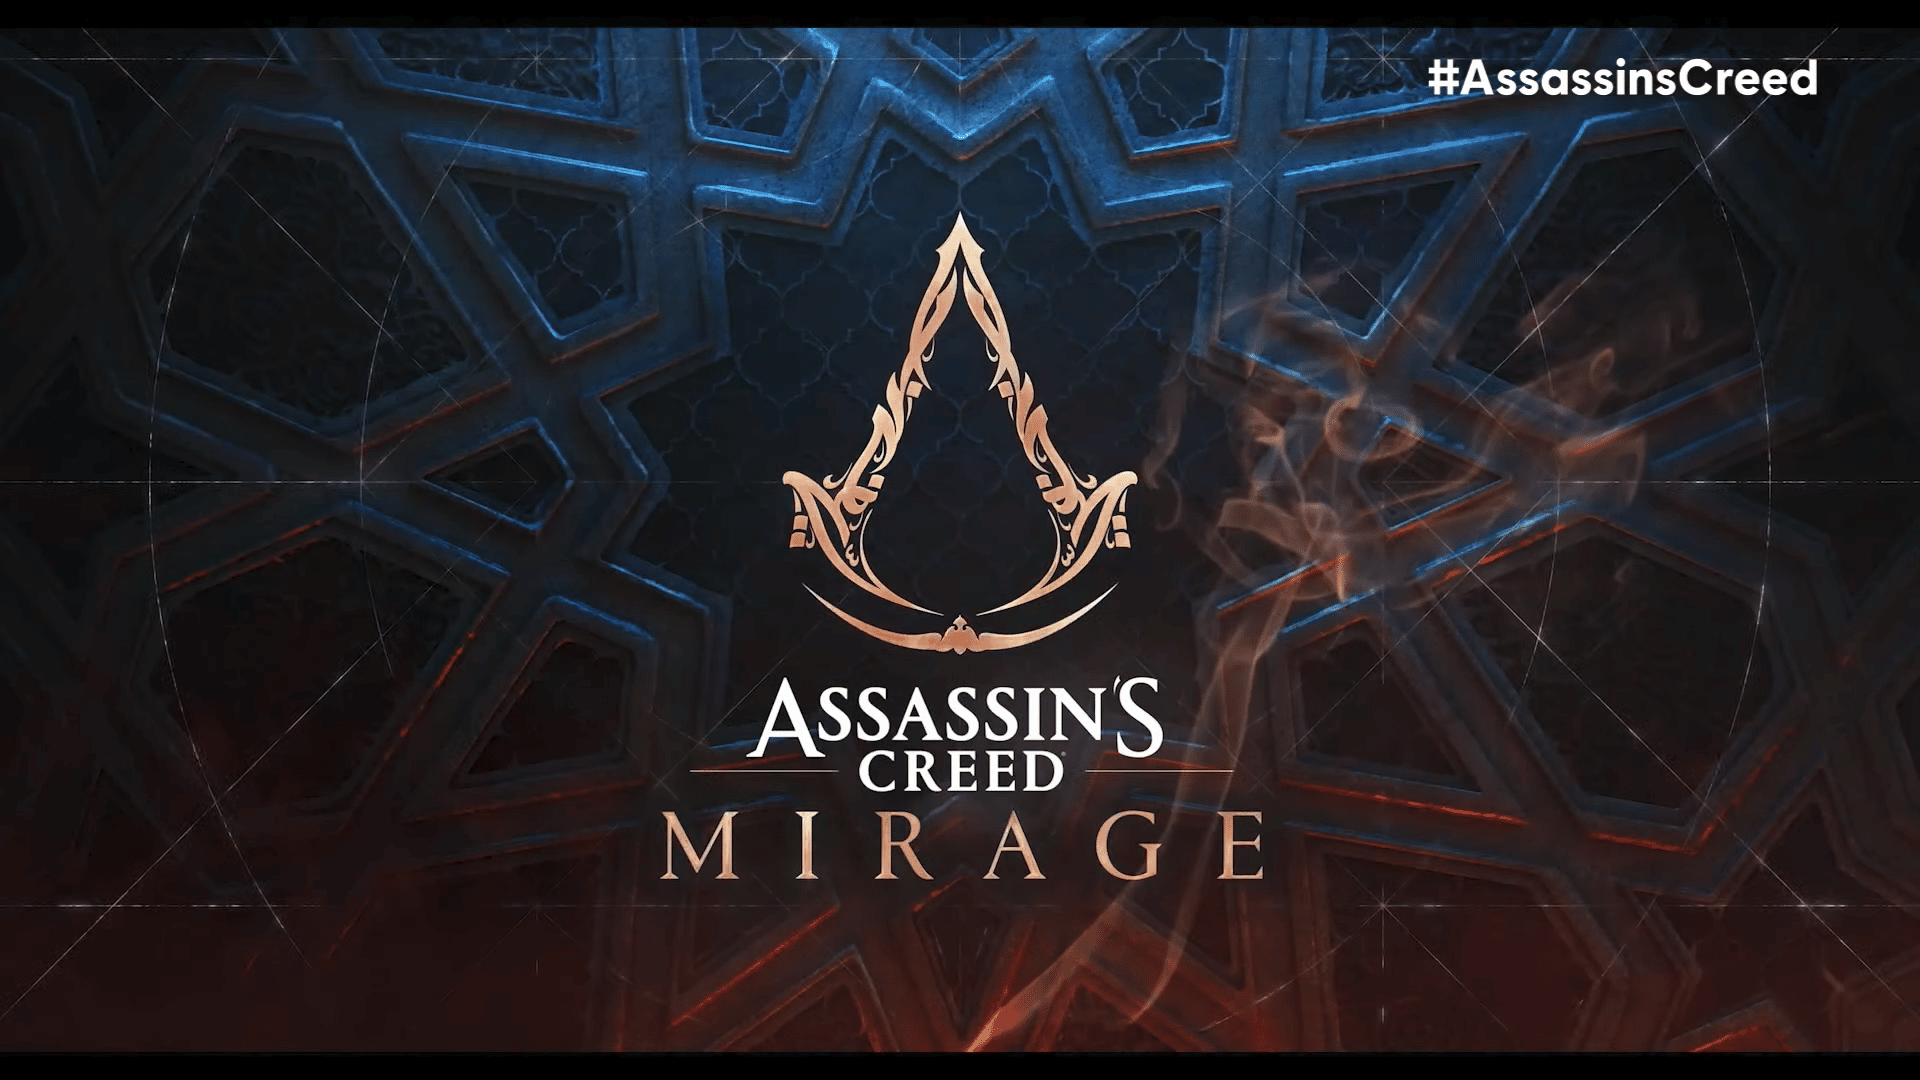 Assassin's Creed Mirage Announcement Trailer, 2023 Release; 20 Years Before Valhalla, Takes Place In Baghdad